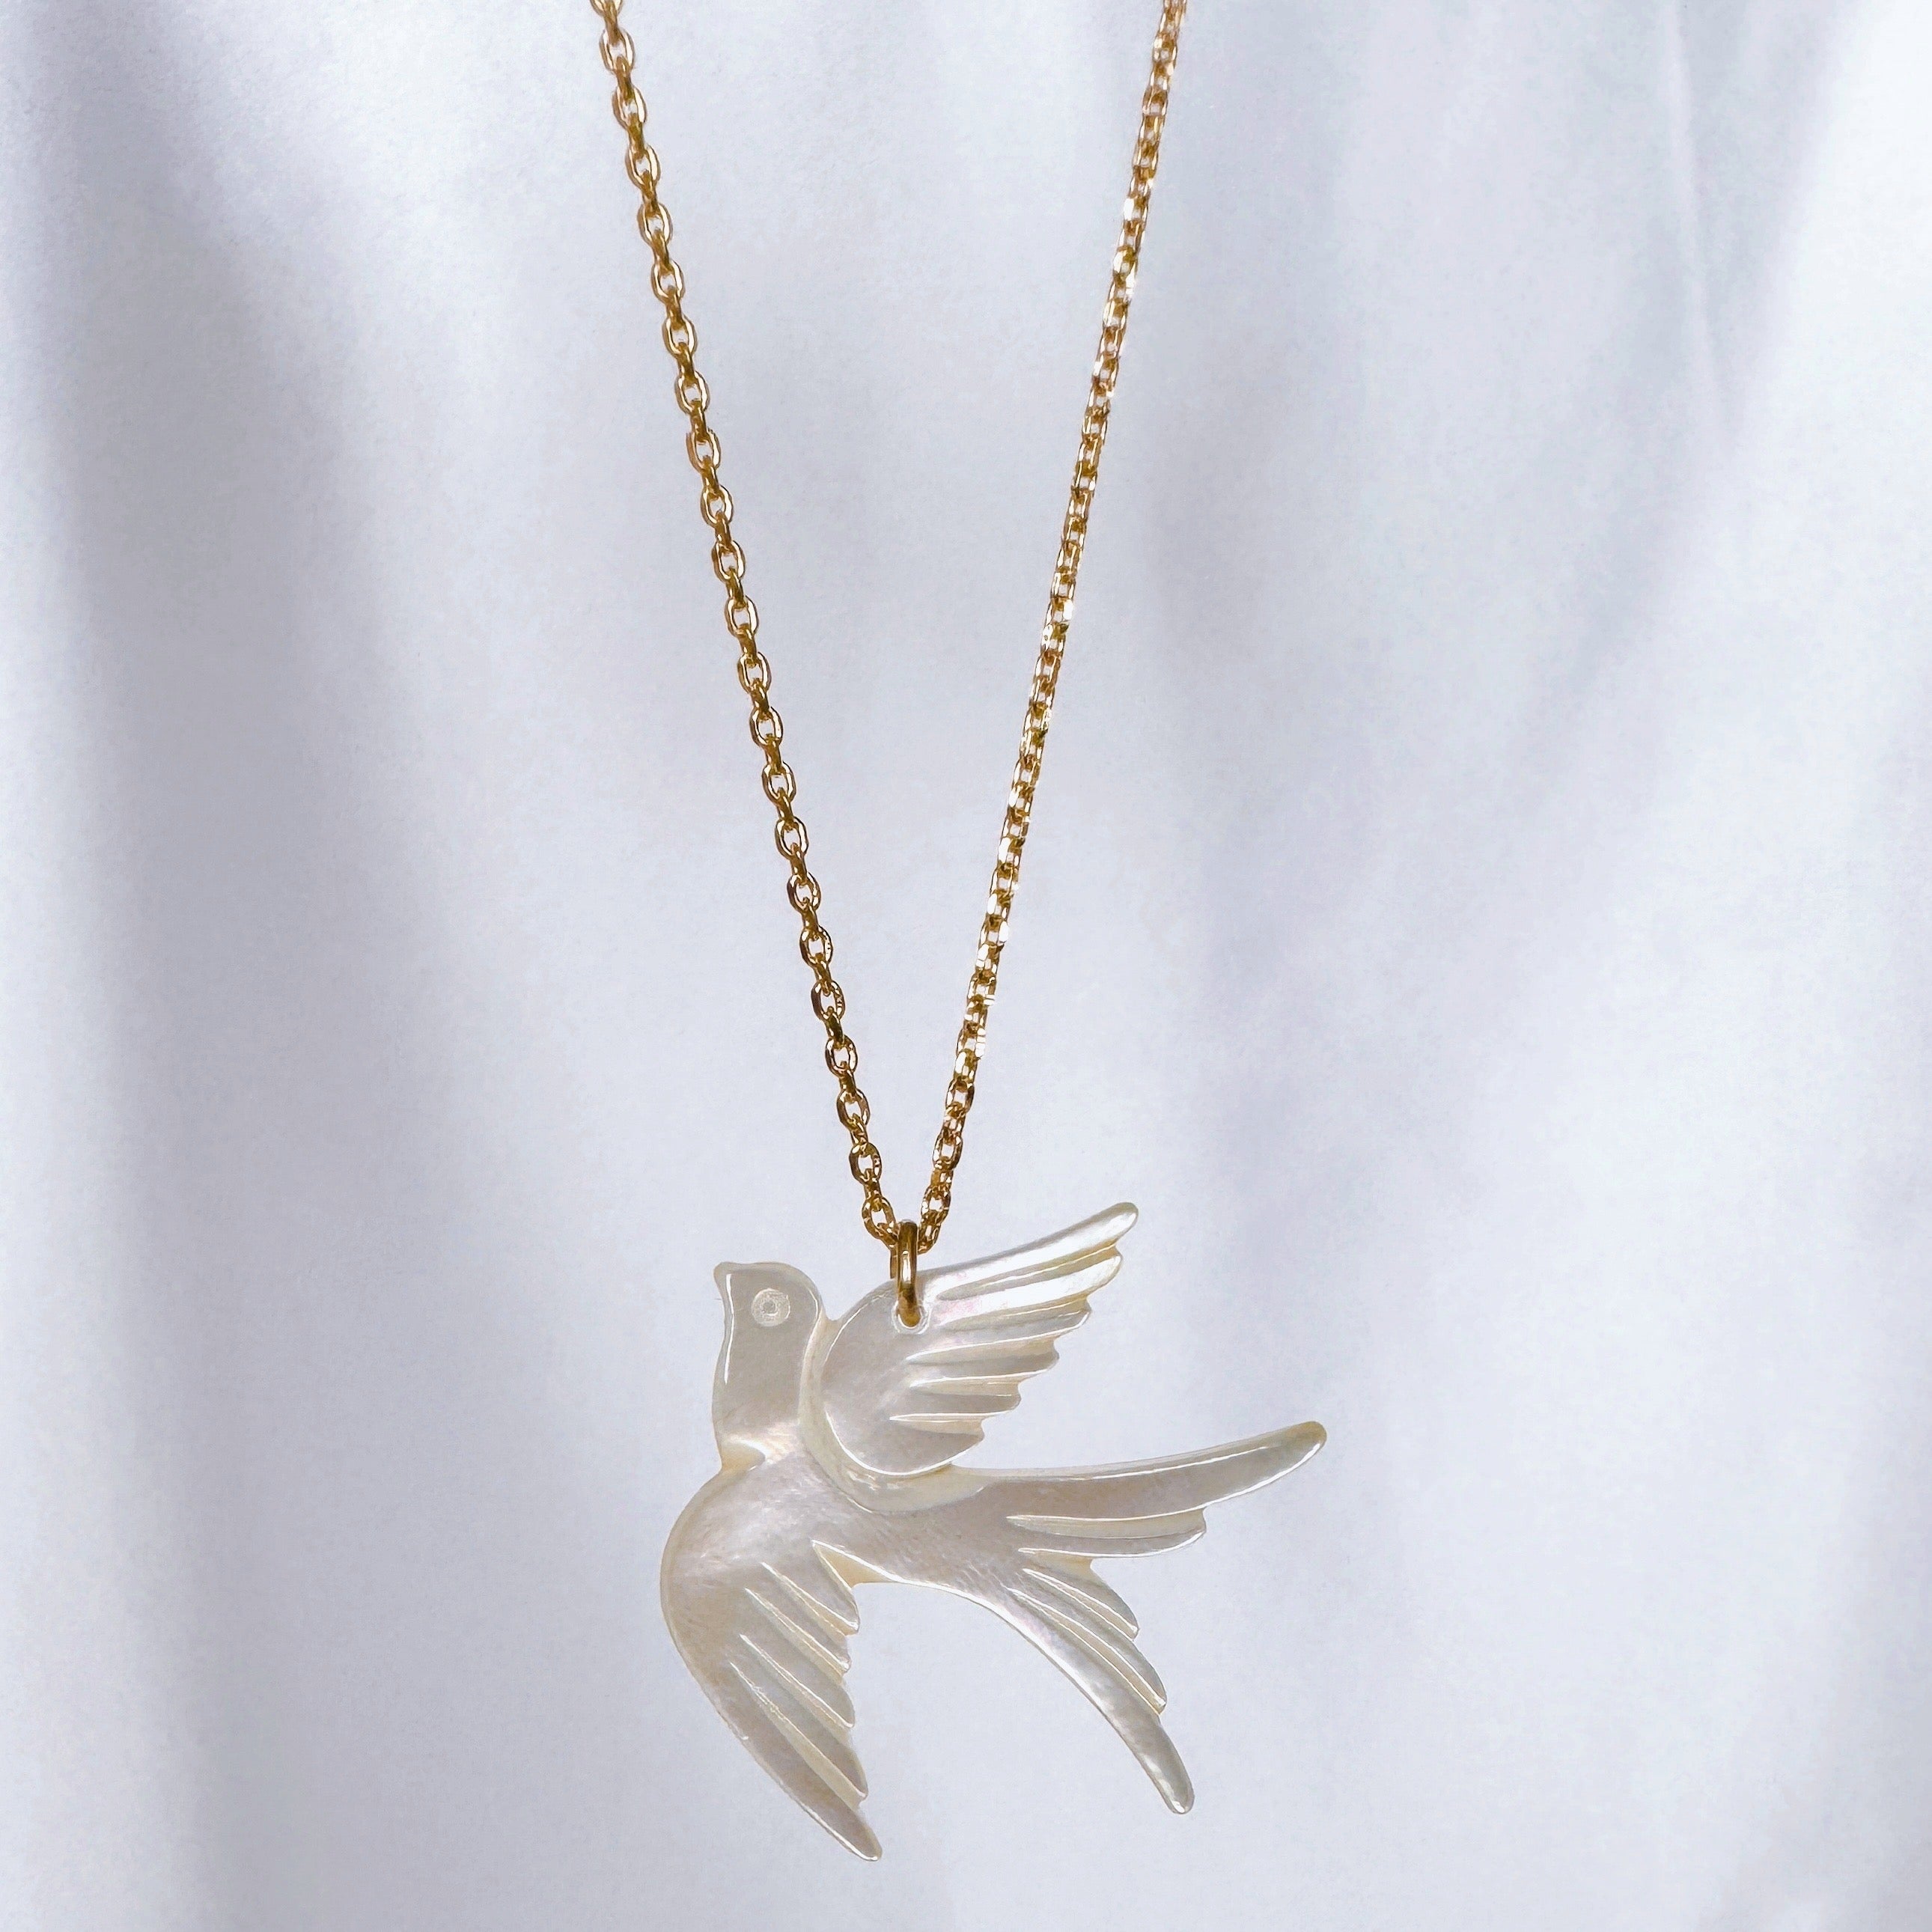 Gold-plated “Swallow” necklace